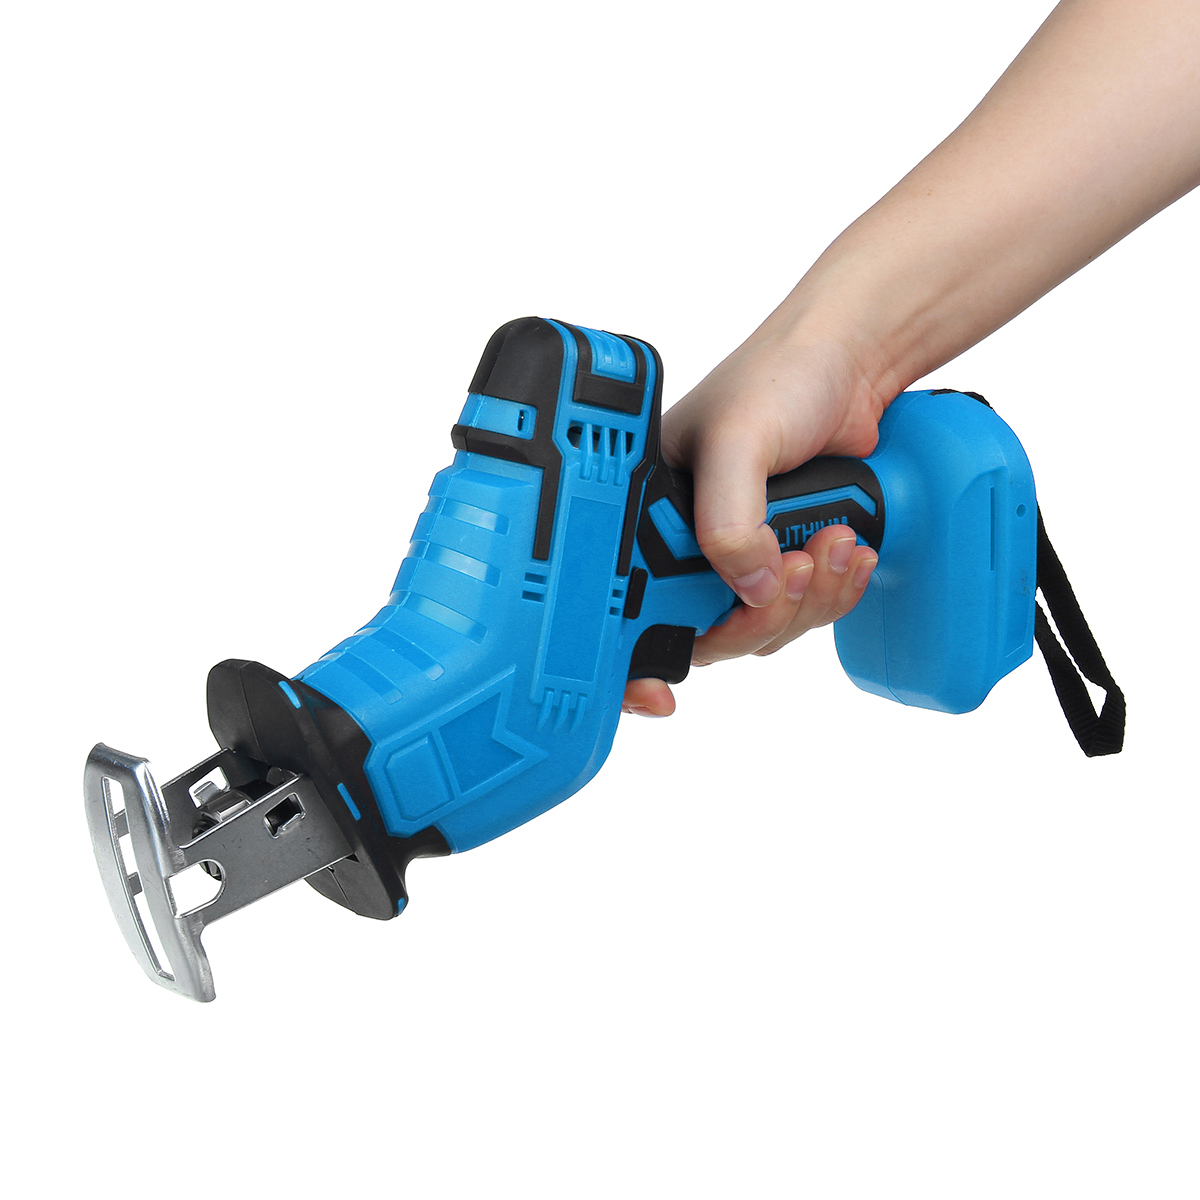 Portable-Cordless-Electric-Saws-Reciprocating-Saw-Kit-Woodworking-Cutting-Tool-For-Makita-Battery-1783491-6